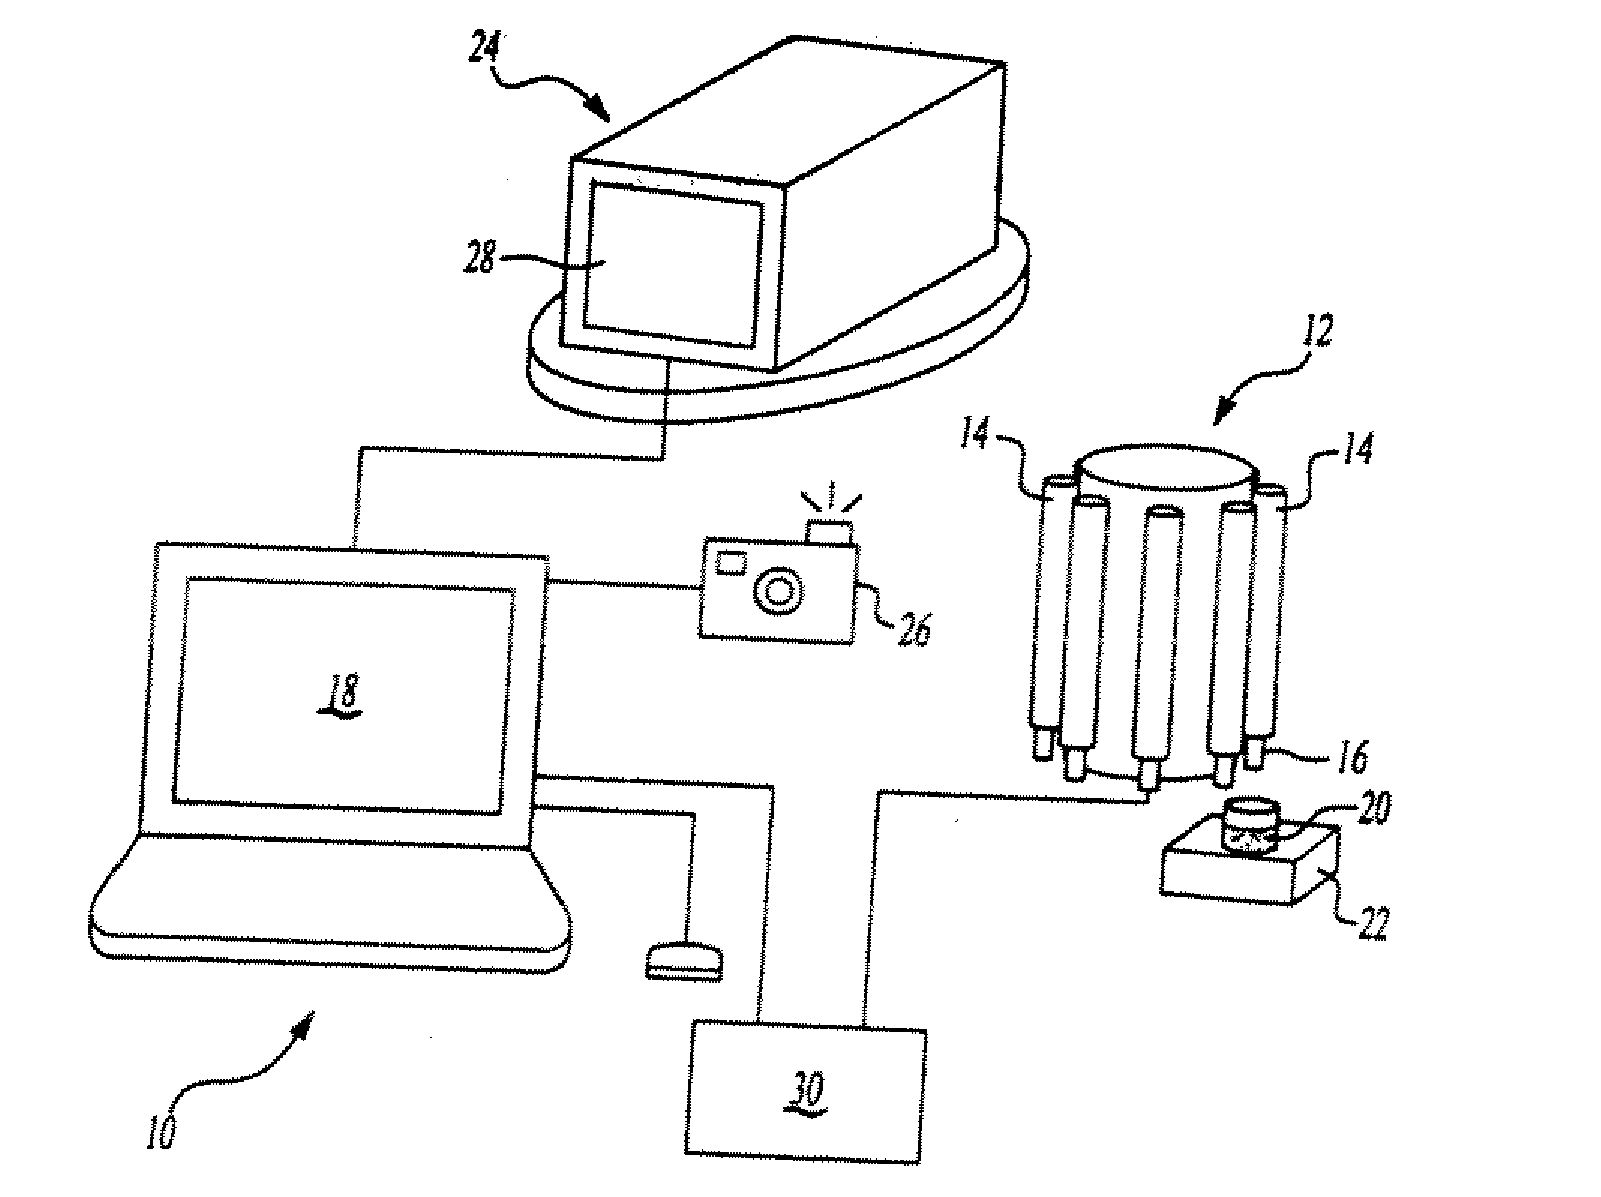 Point-of-sale body powder dispensing system